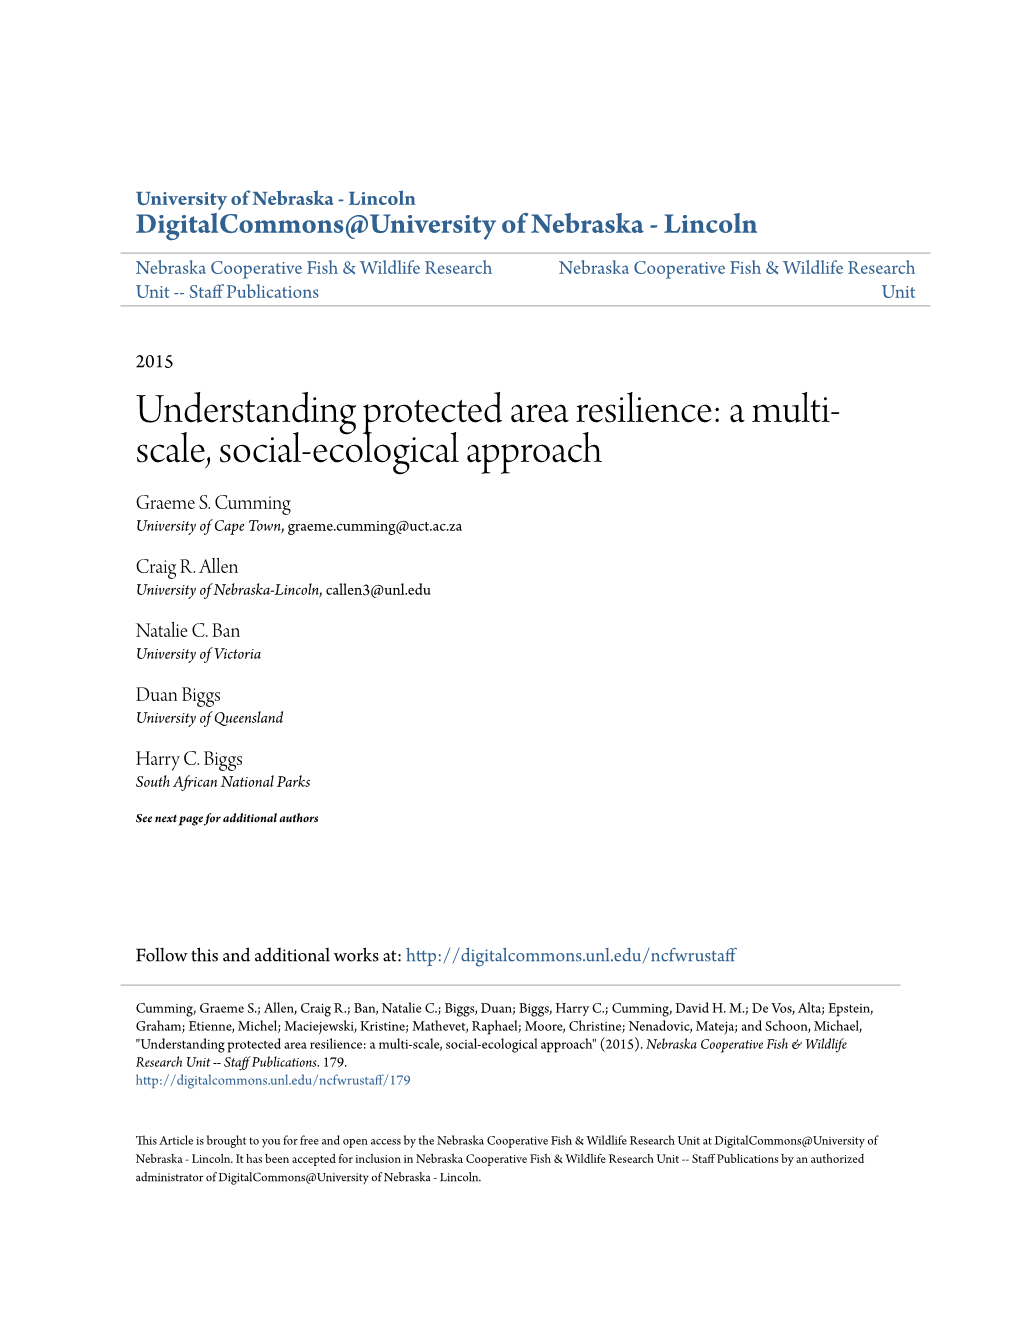 Understanding Protected Area Resilience: a Multi-Scale, Social-Ecological Approach" (2015)